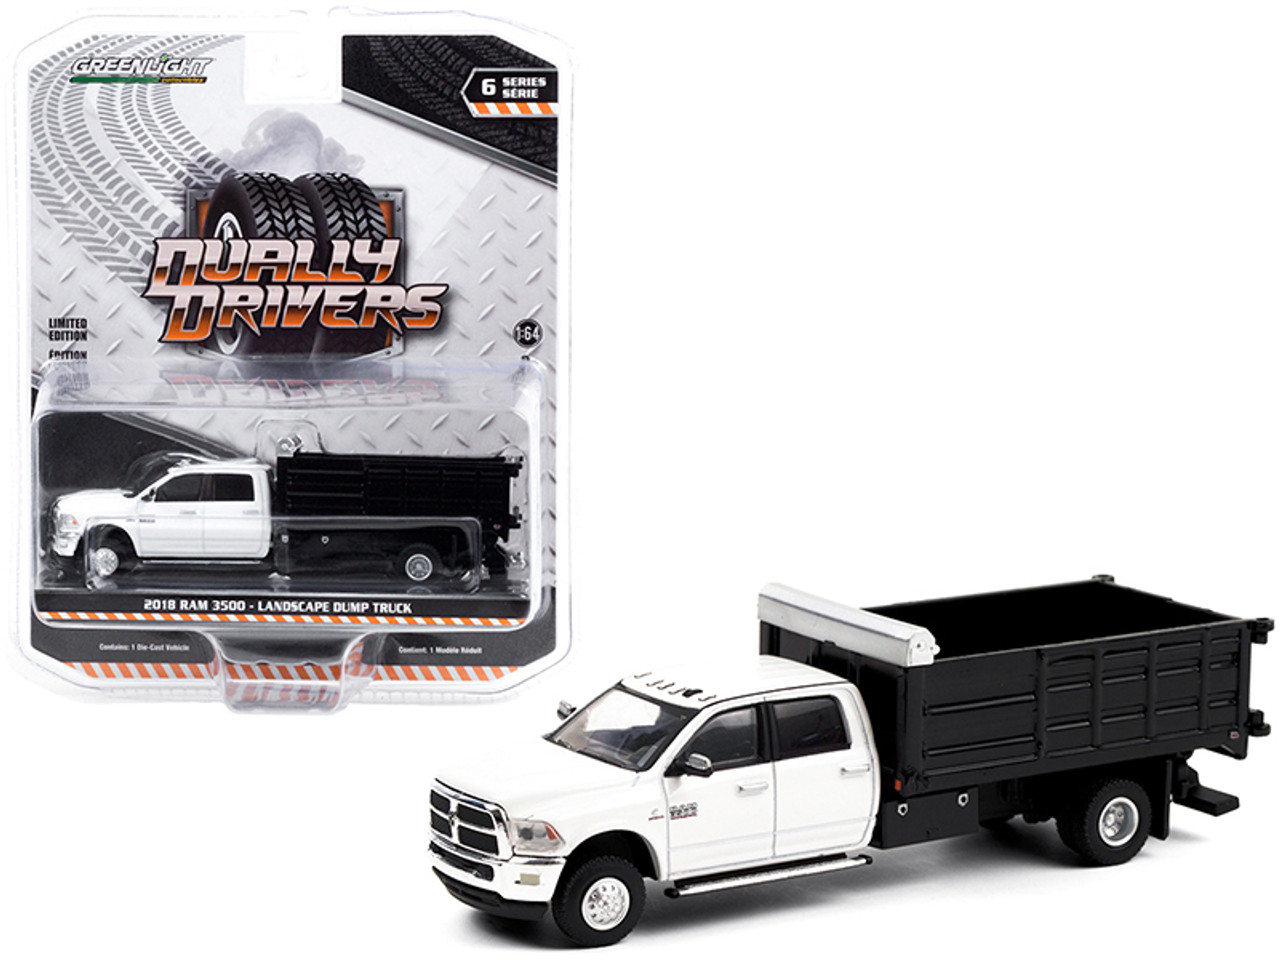 2018 Dodge Ram 3500 Dually Landscaper Dump Truck Bright White and Black "Dually Drivers" Series 6 1/64 Diecast Model Car by Greenlight